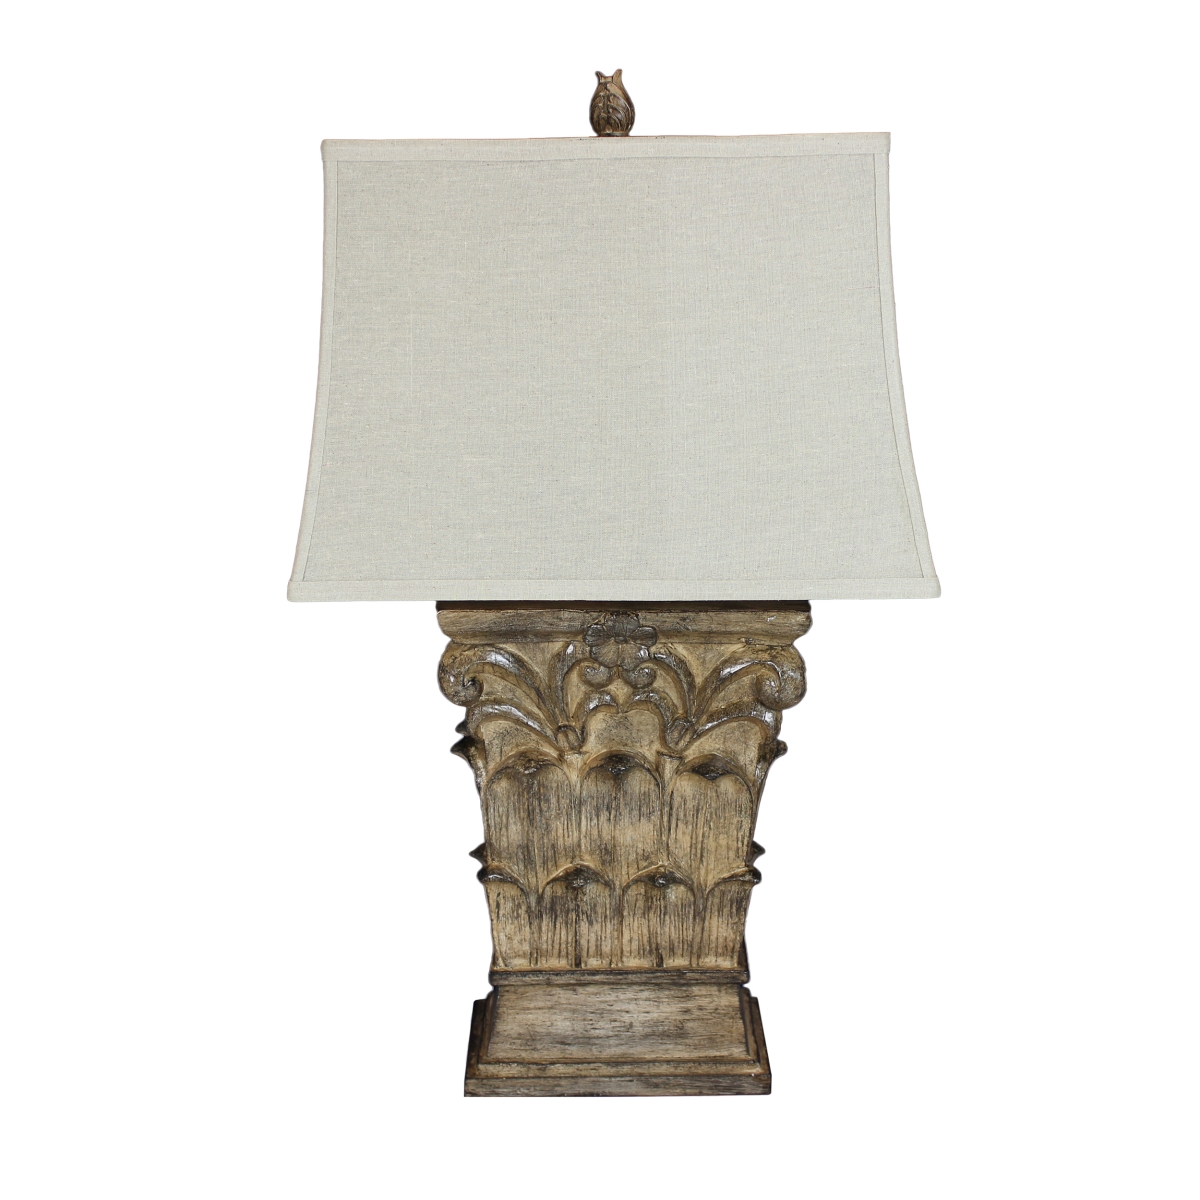 Urban Designs 1371542 Grotto Sculpted Table Lamp